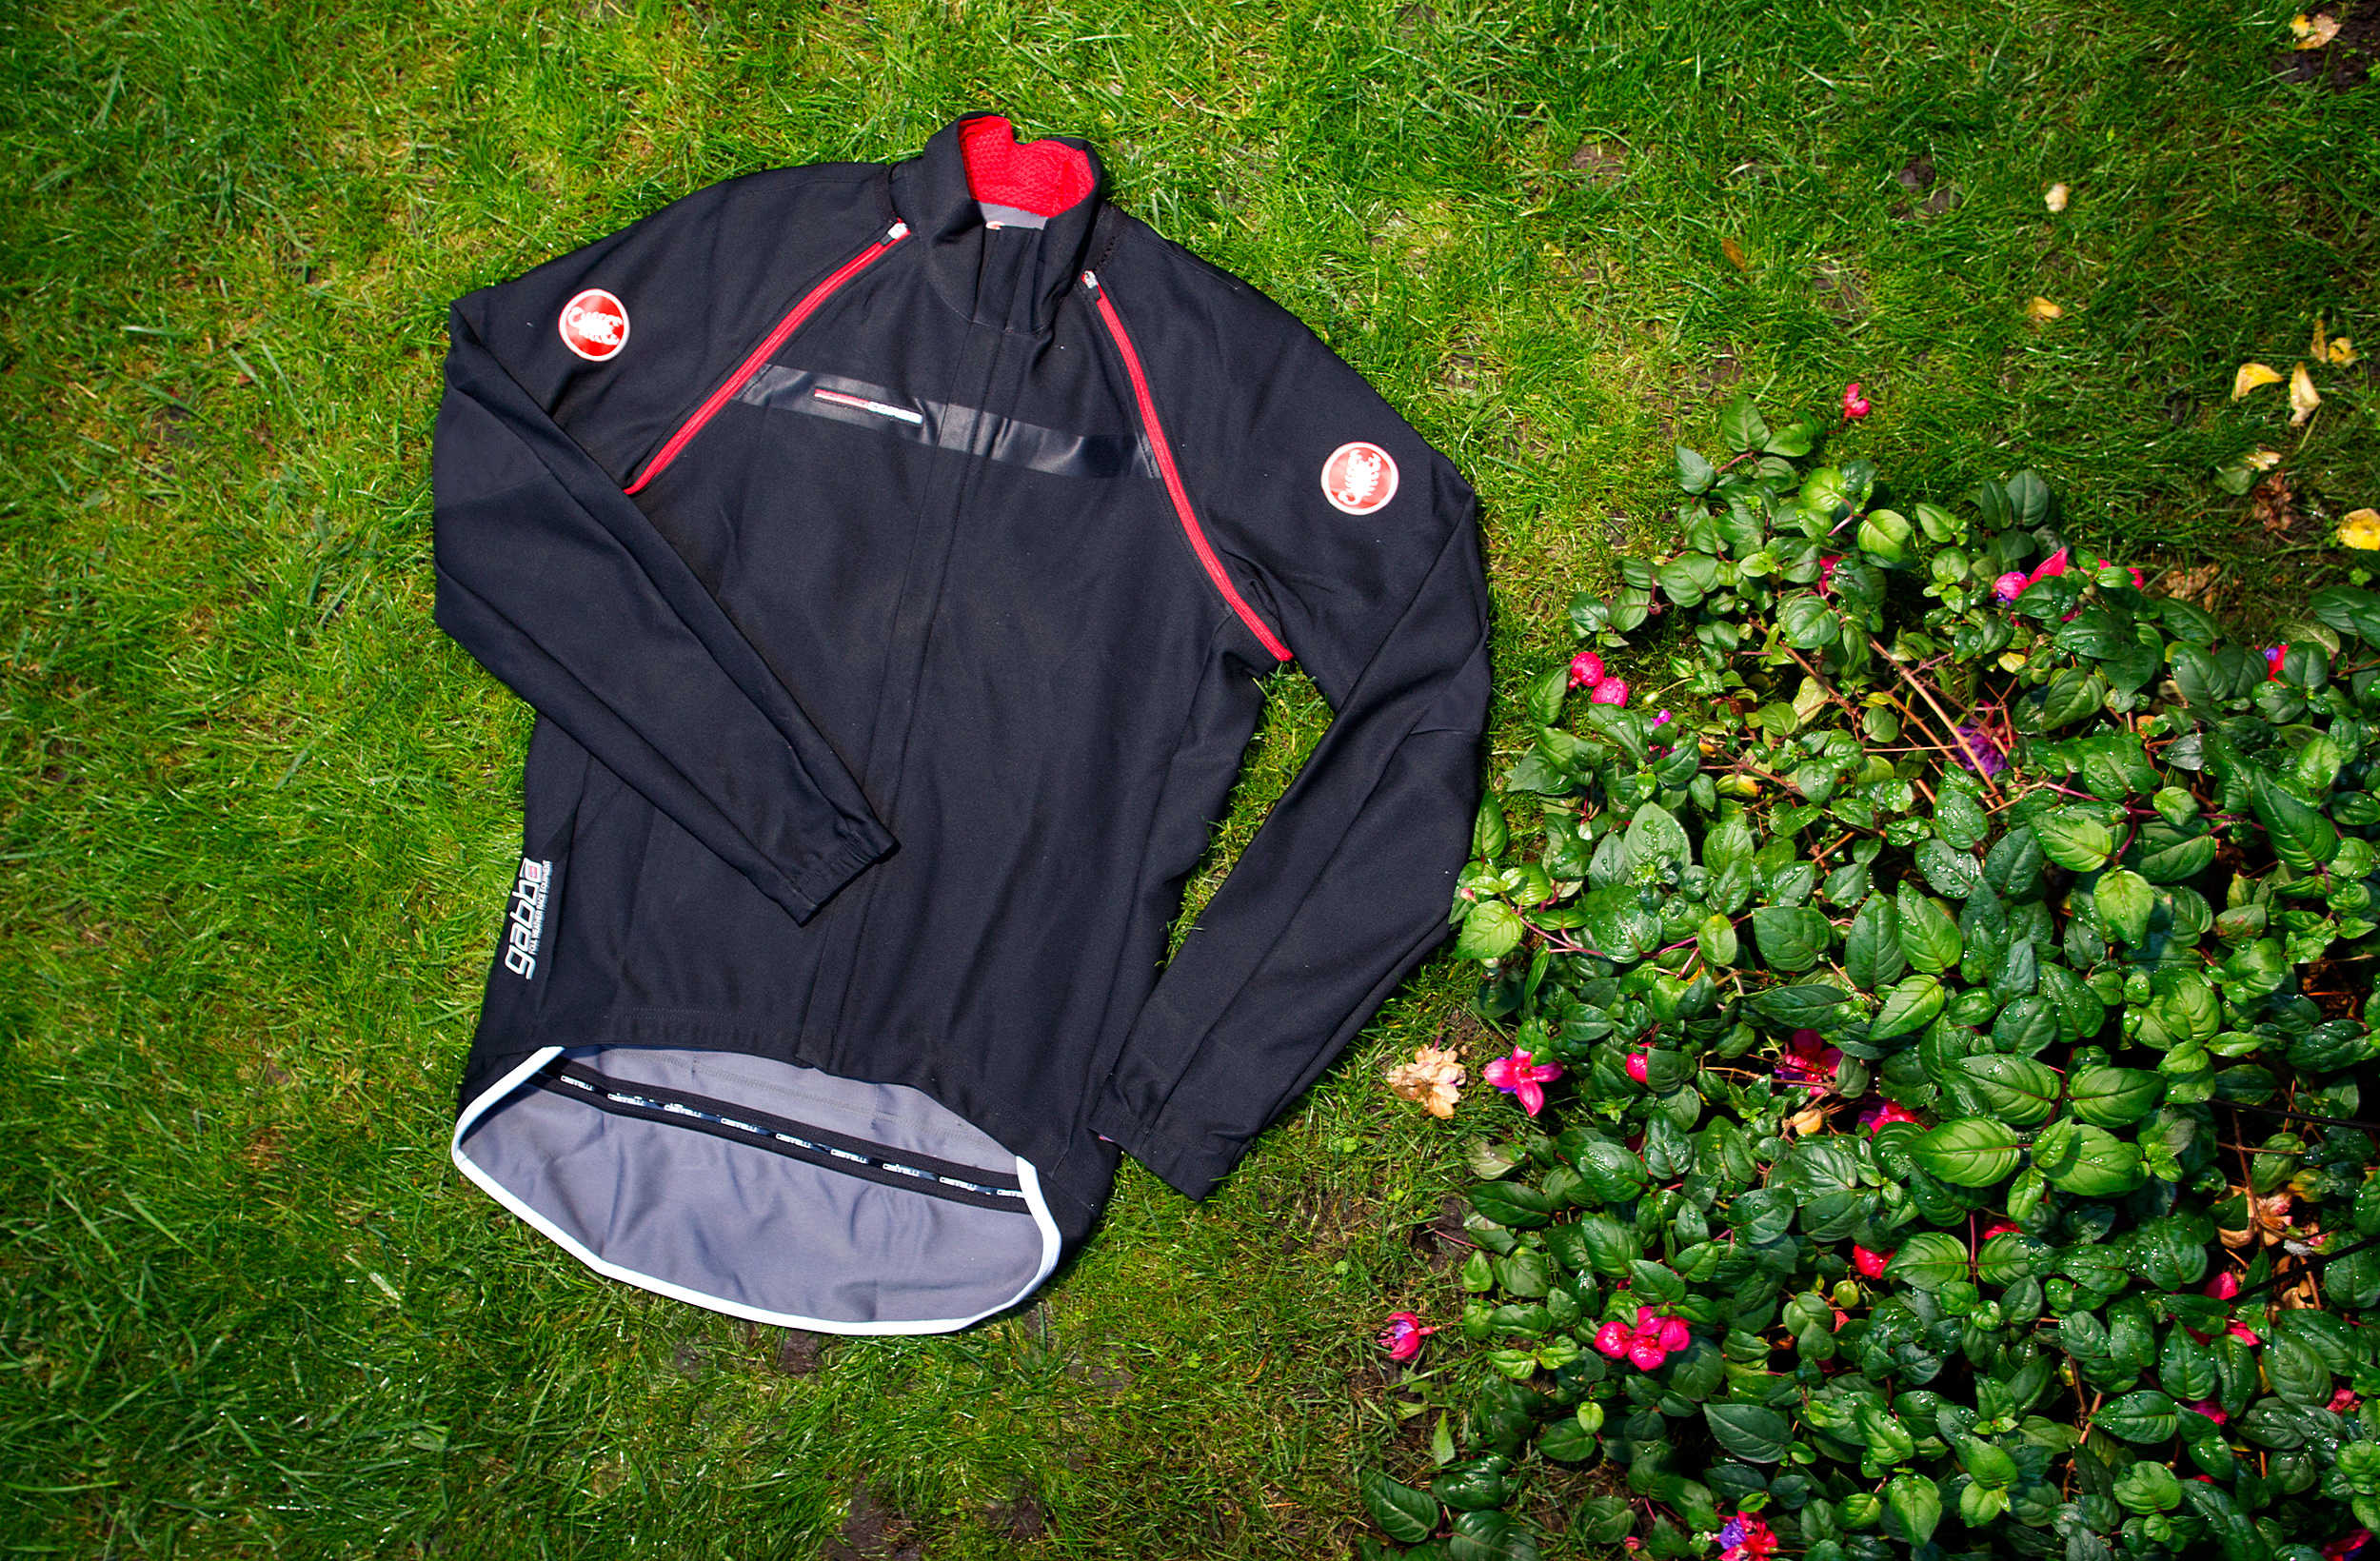 With a zip of the sleeves the Gabba 2 jacket readies you for any amount of inclement weather.